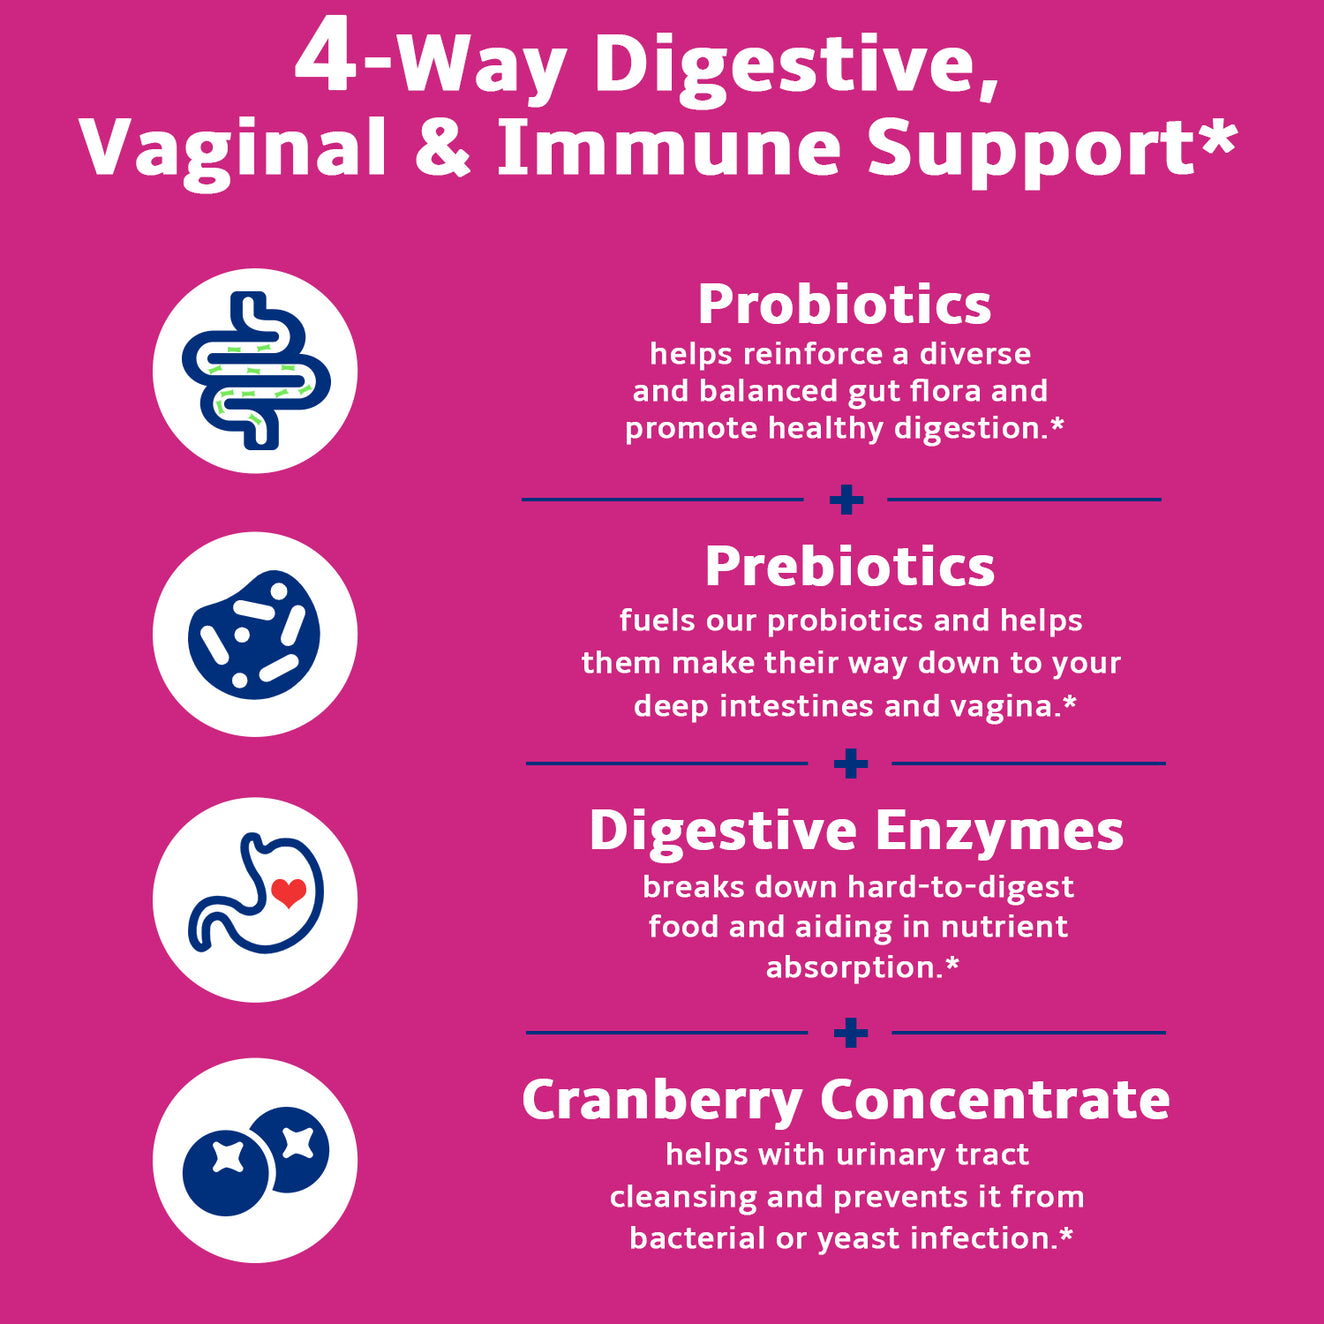 Women's Once-Daily Probiotics